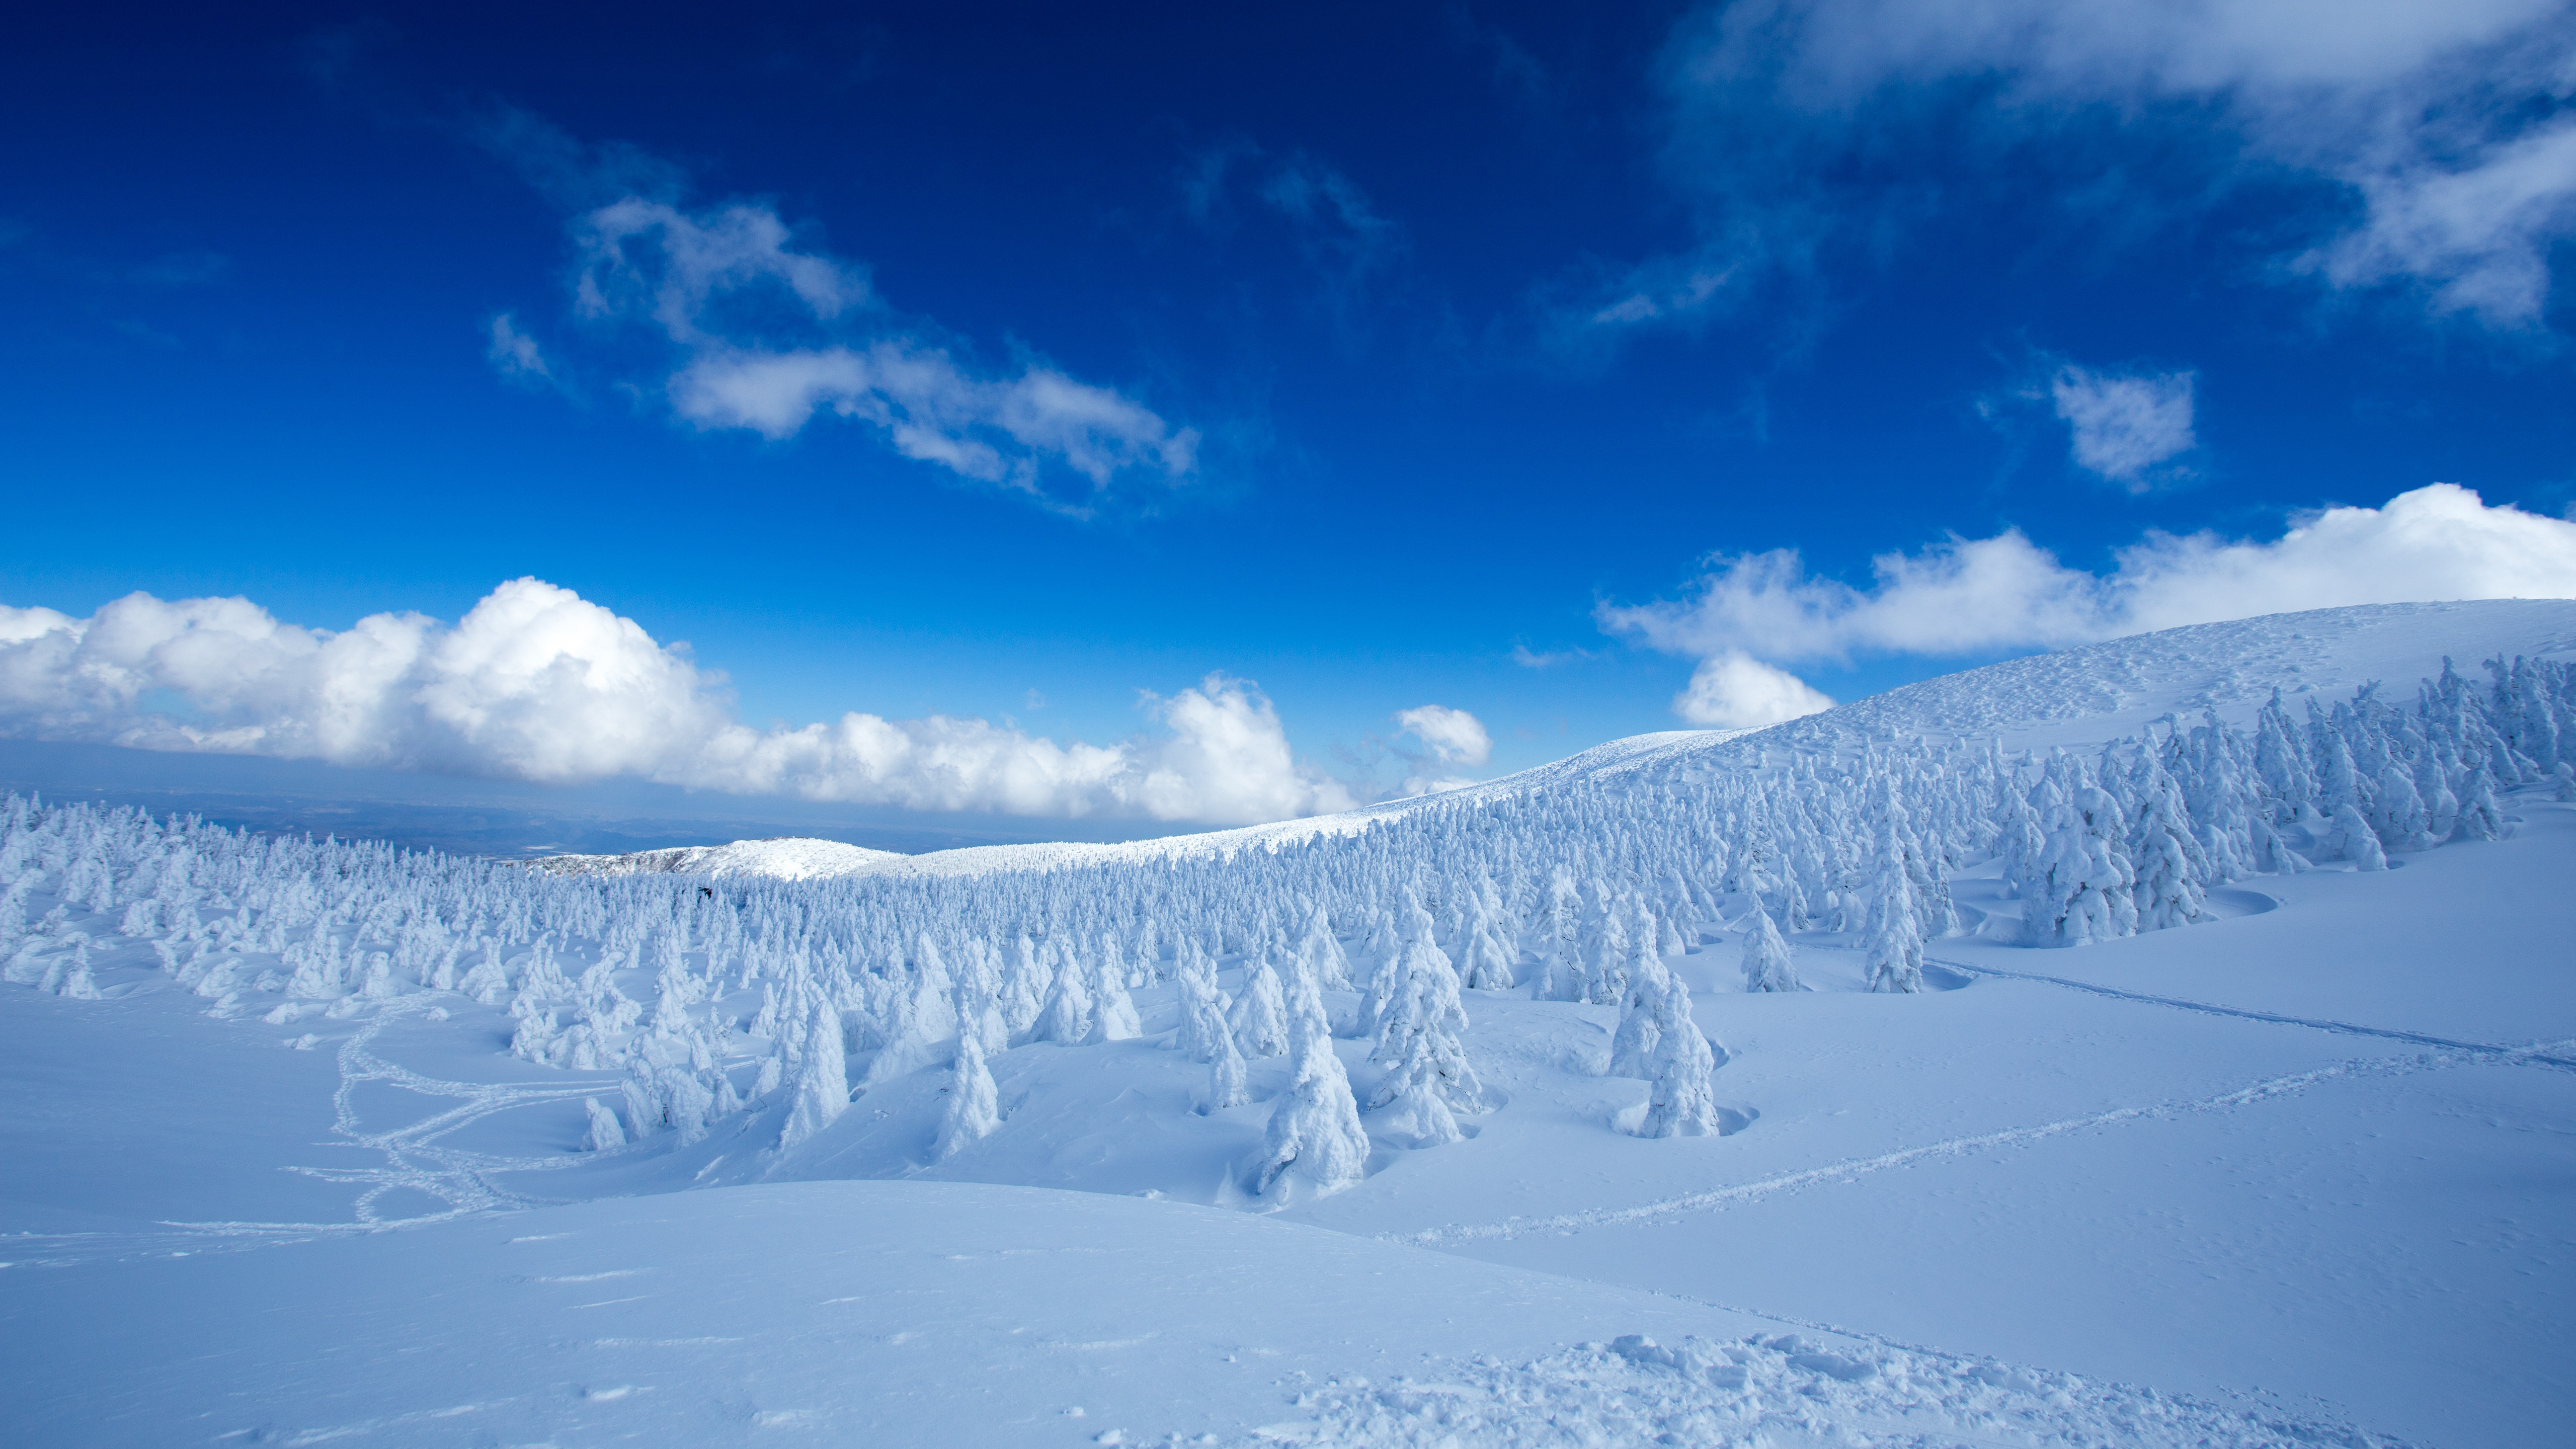 Landscape Of Snow Covered Pine Trees In Snow Field Forest Under Blue Cloudy Sky 4K 5K HD Nature